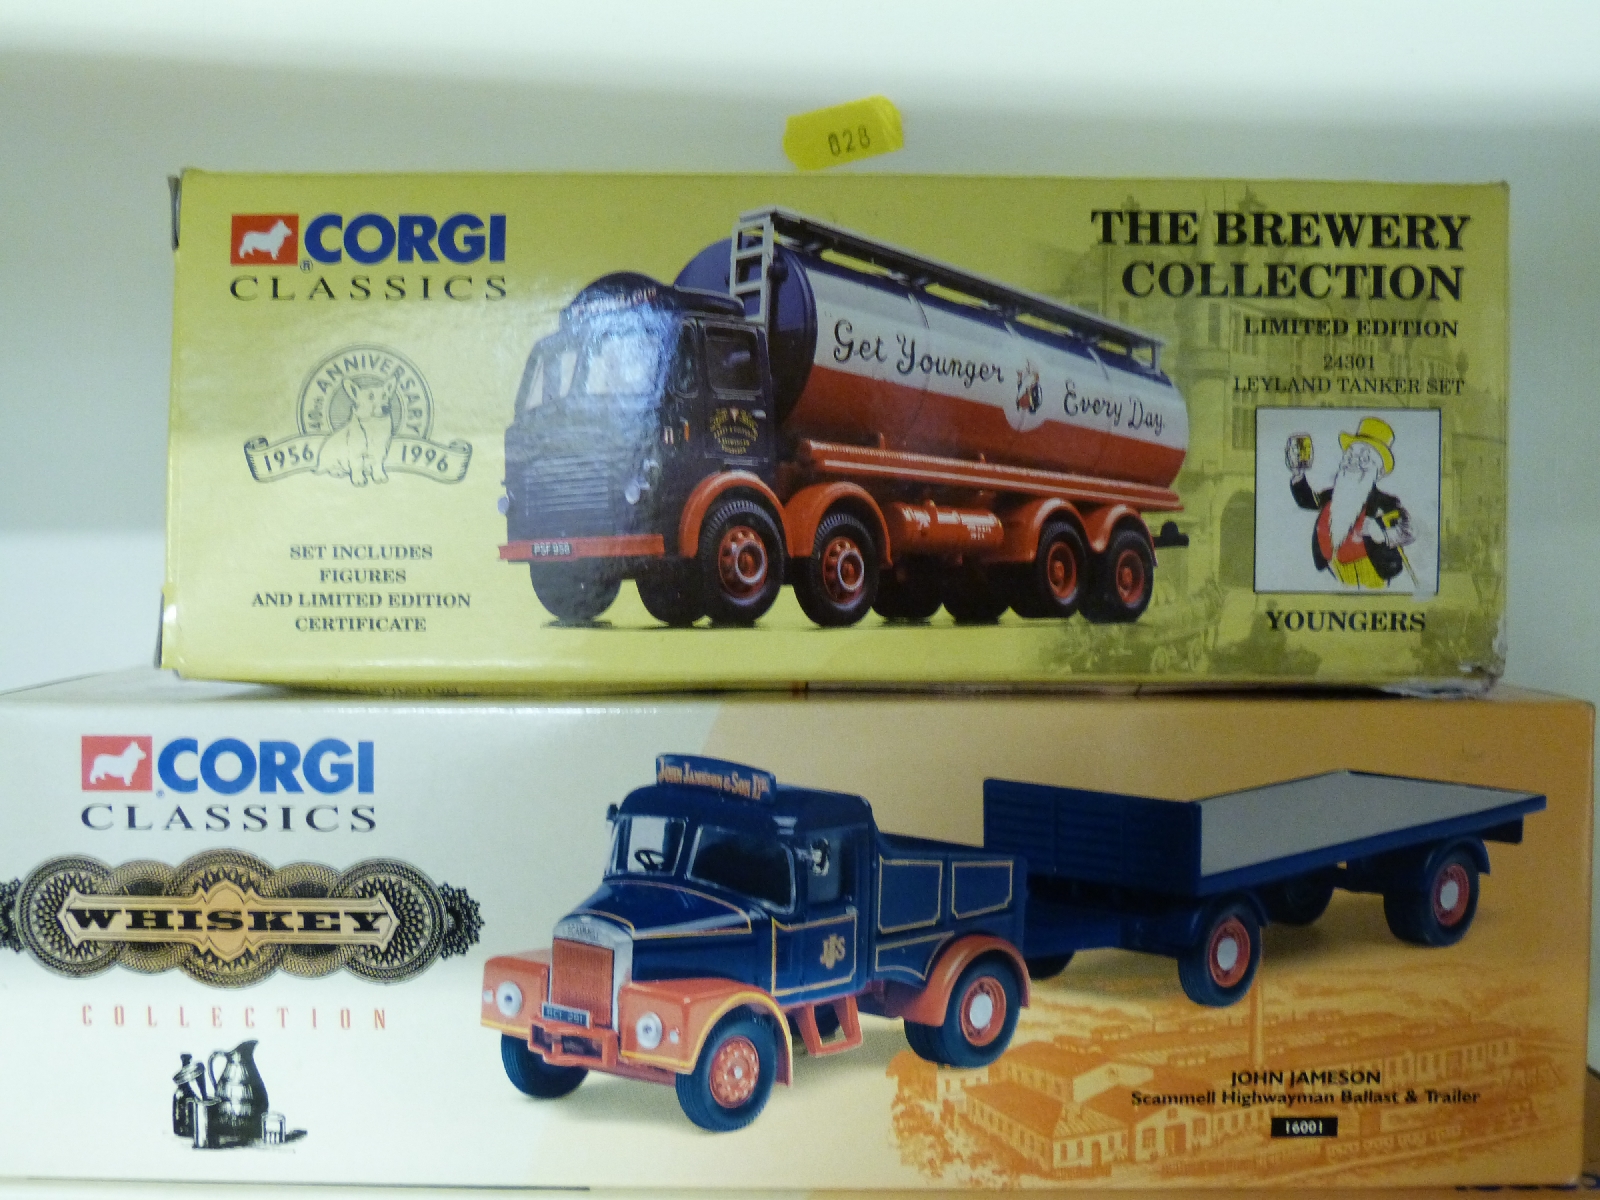 Three Corgi Whisky and Brewery Collection diecast model lorries Scammel Highwayman 16001, - Image 2 of 3